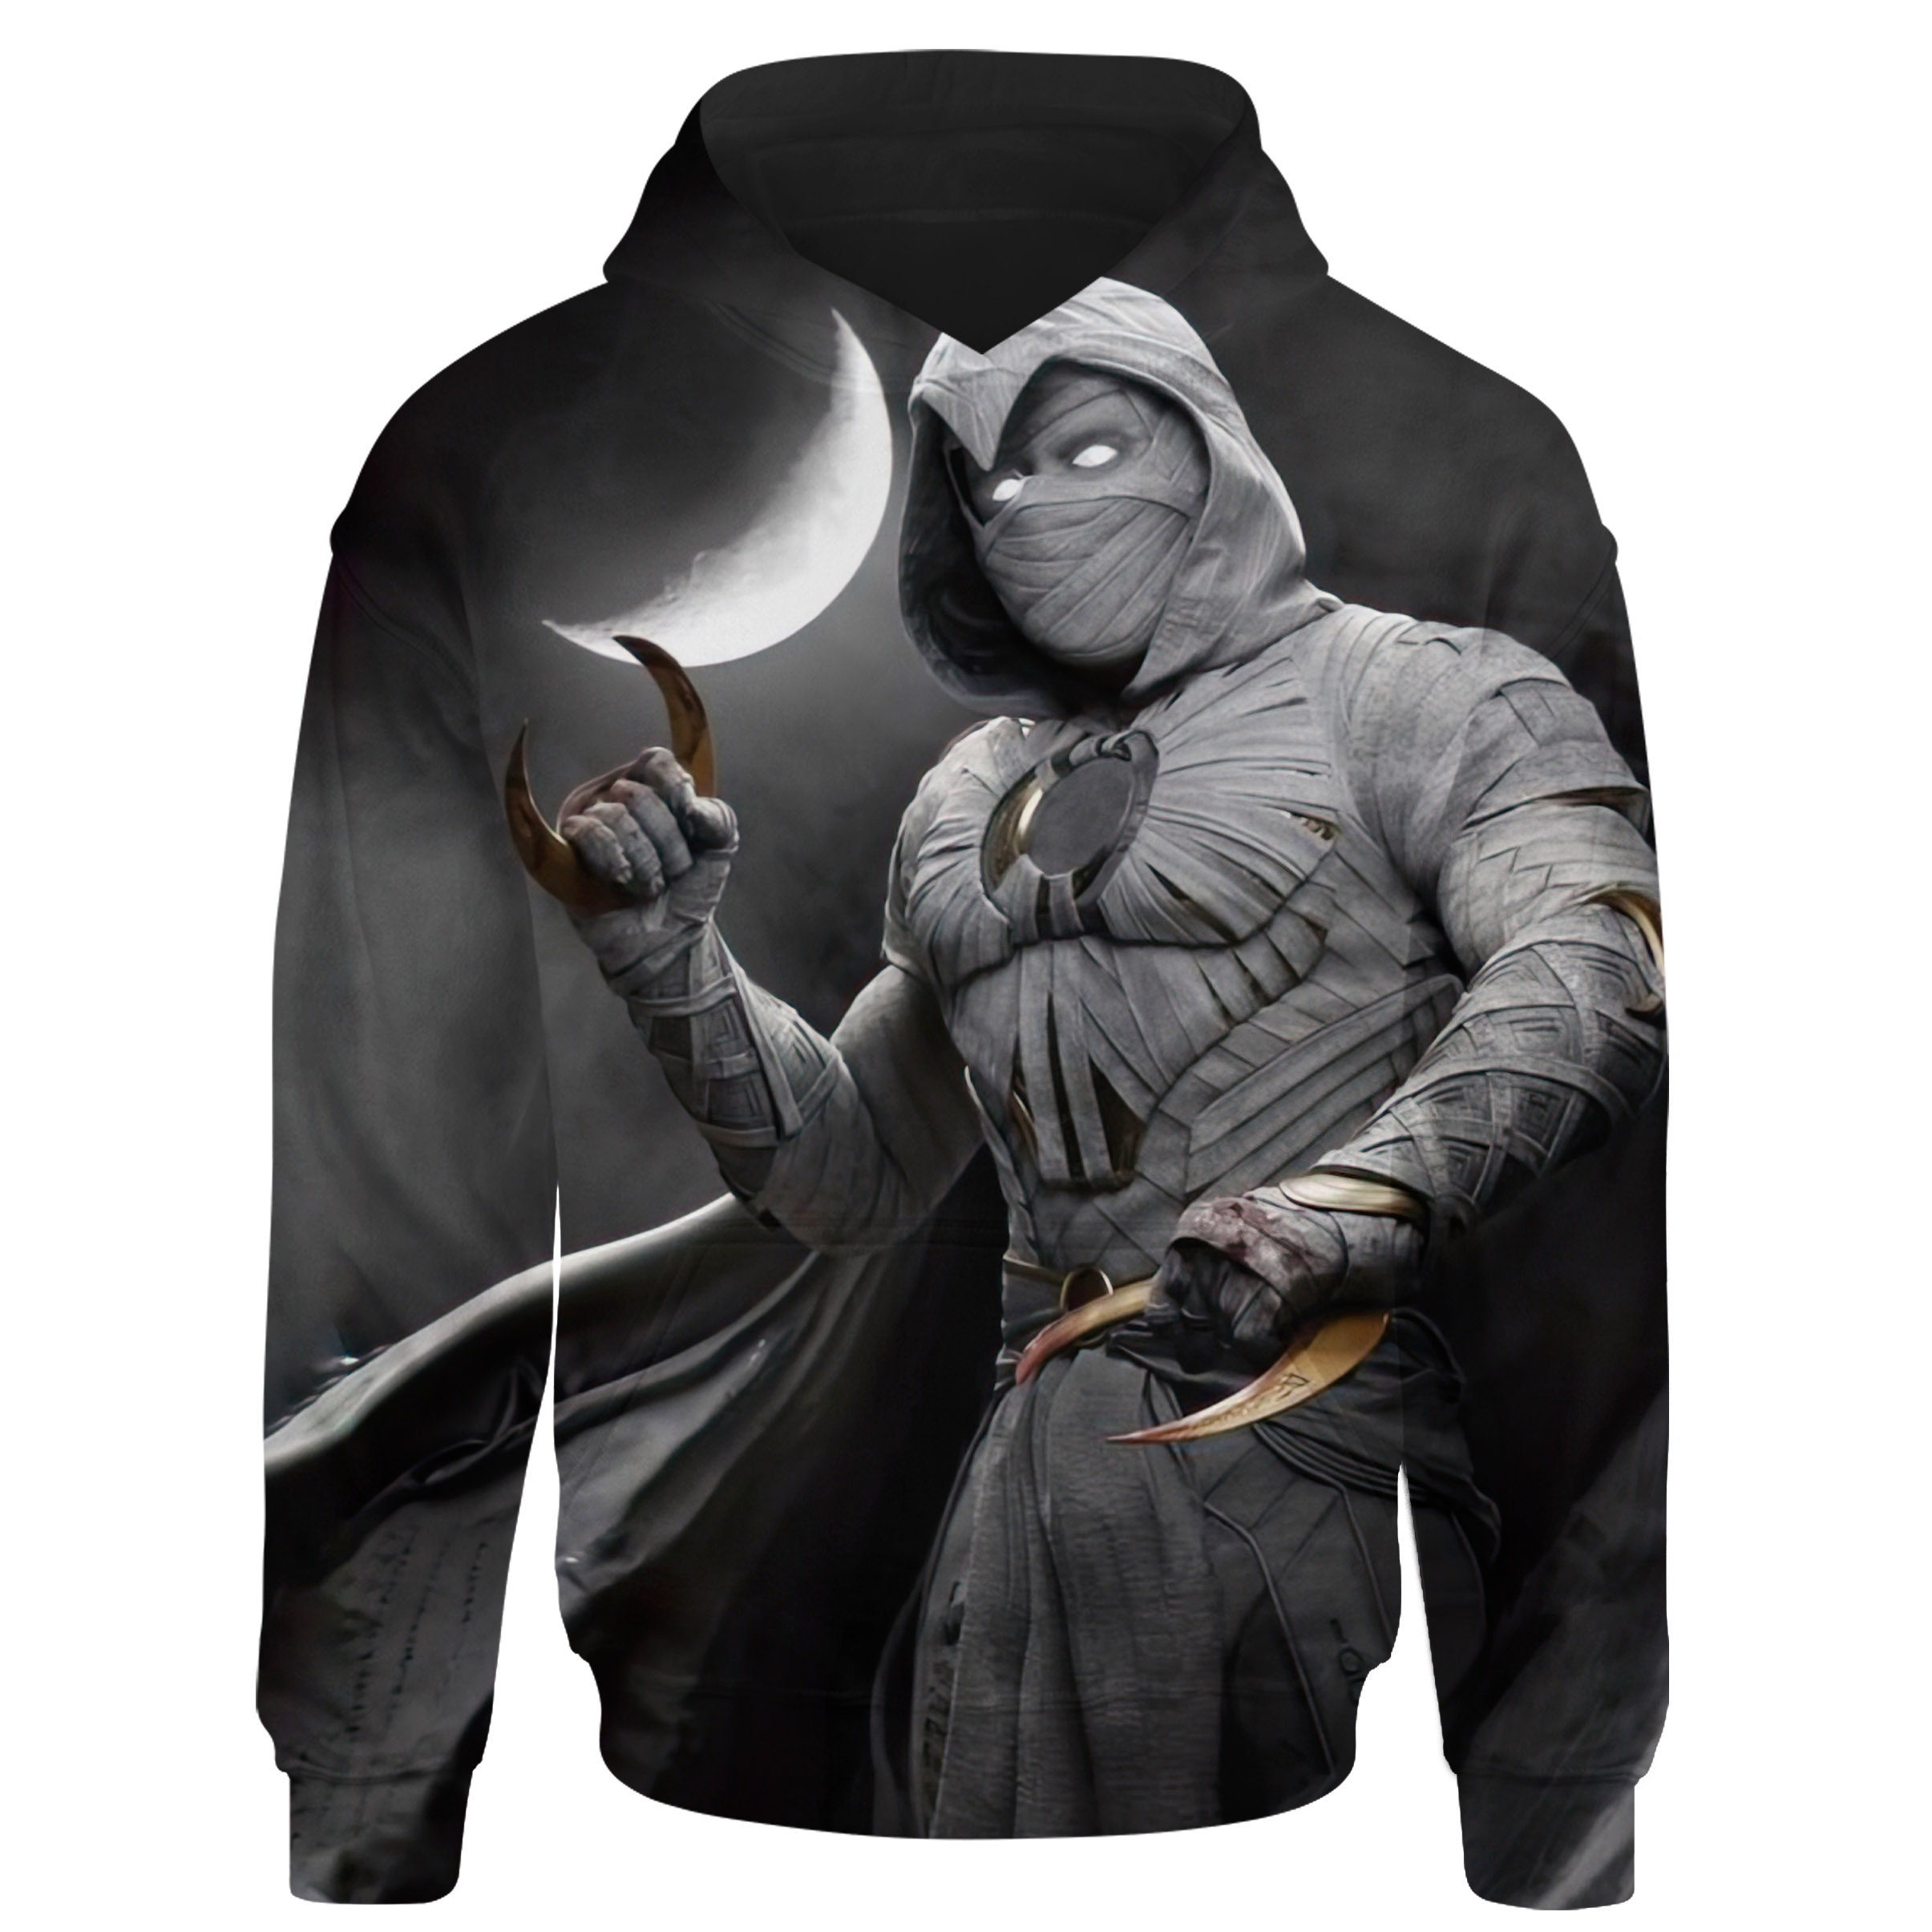 Moon Knight hoodie. (This Is Real!)